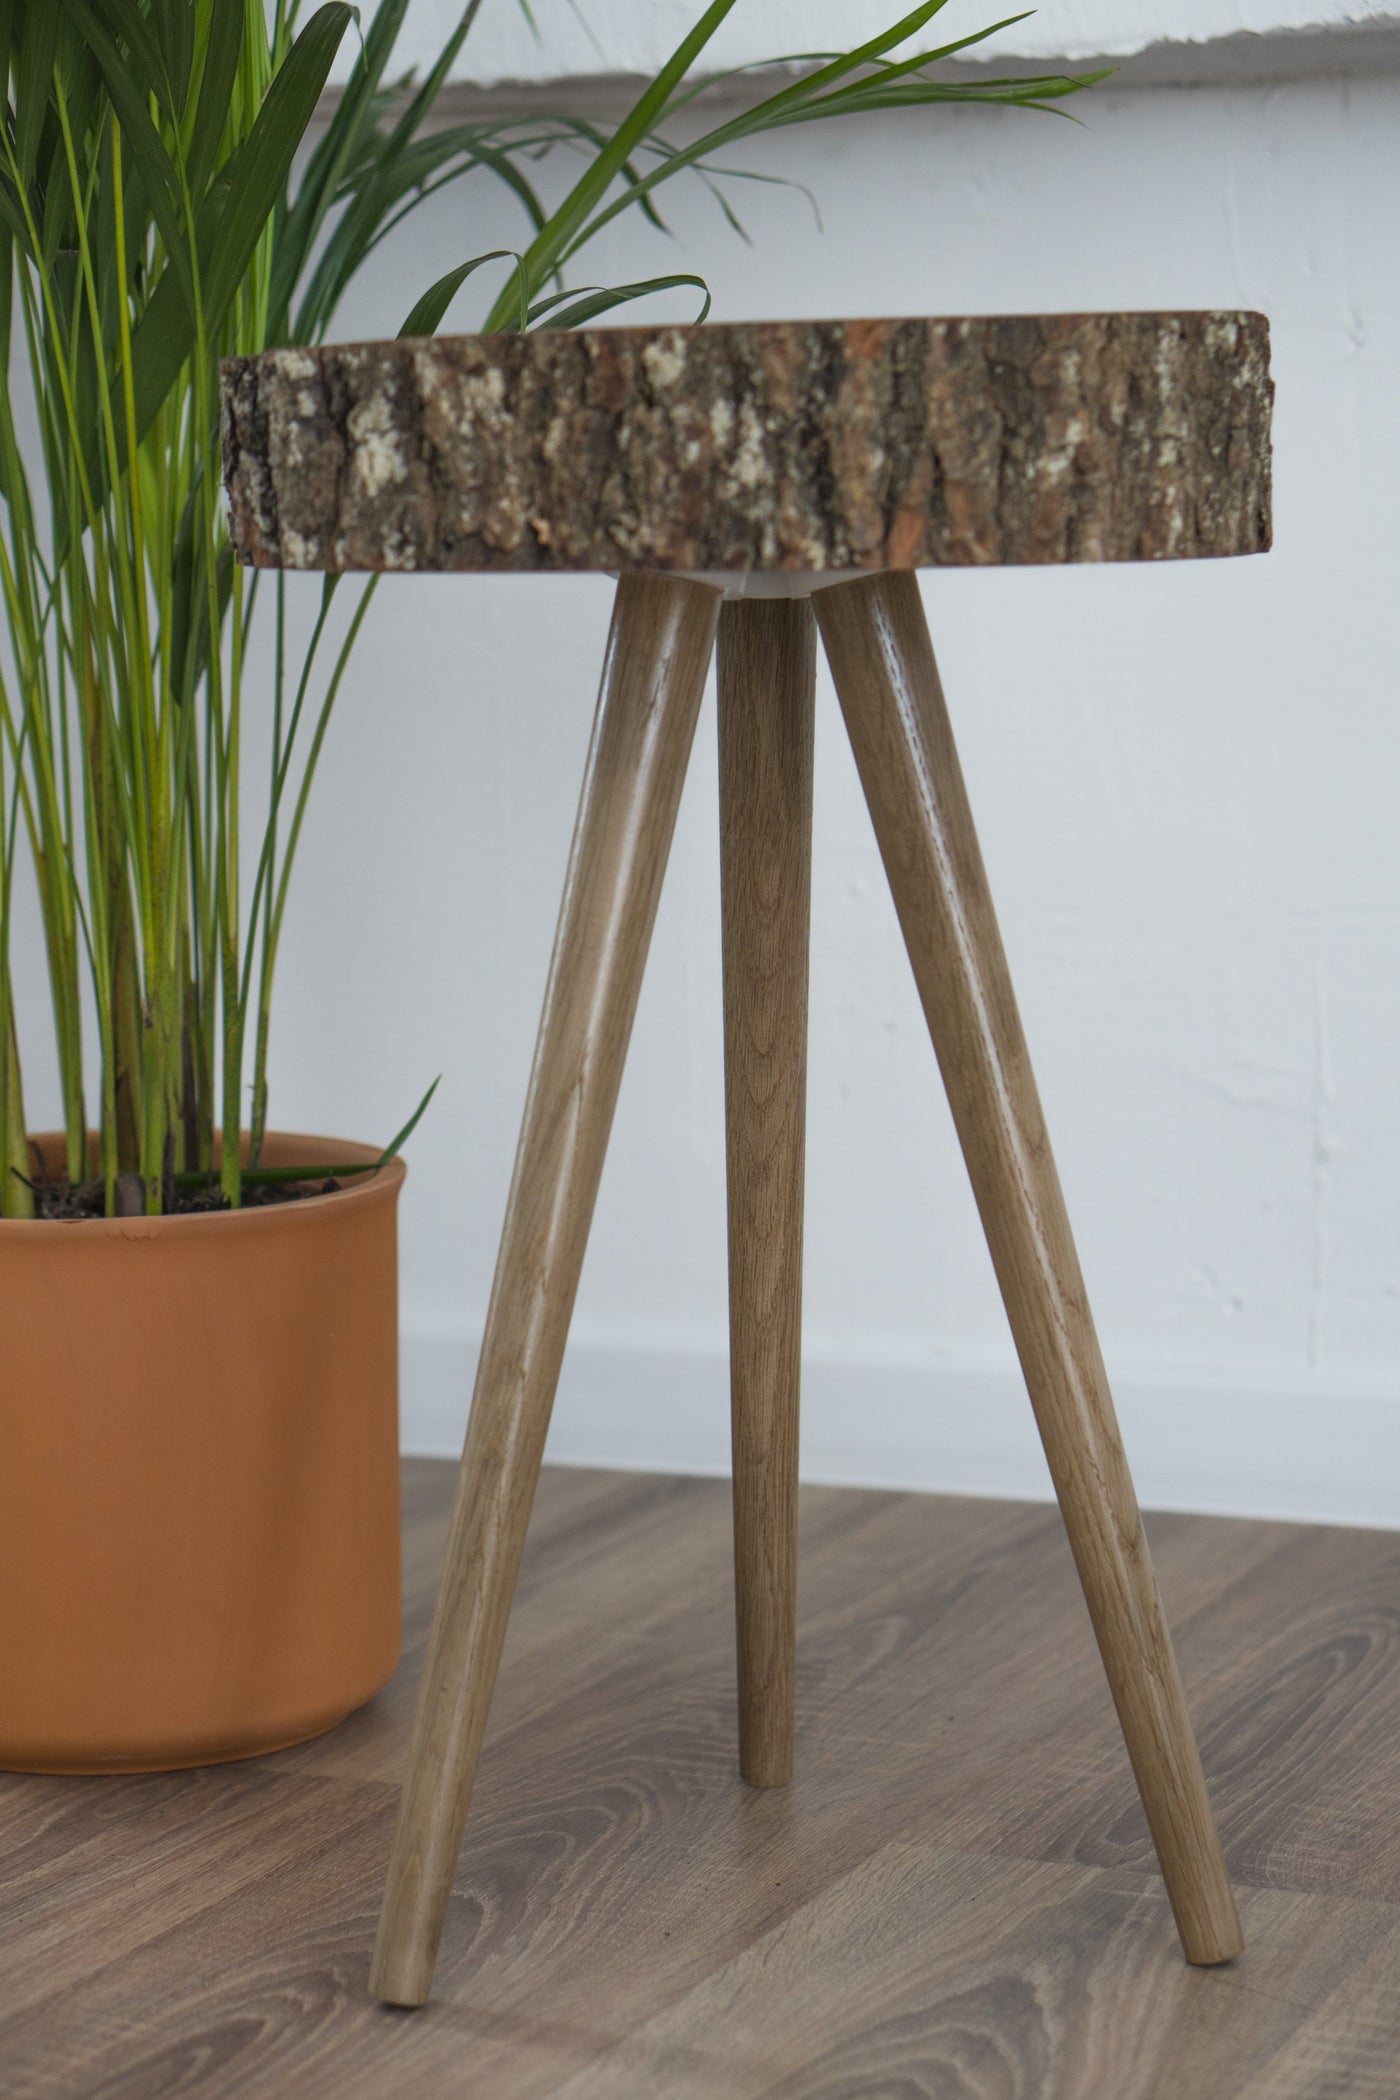 Stala Oak Slice Side Table-Furnishings-SUSTAINABLE DECOR, TABLES-Forest Homes-Nature inspired decor-Nature decor